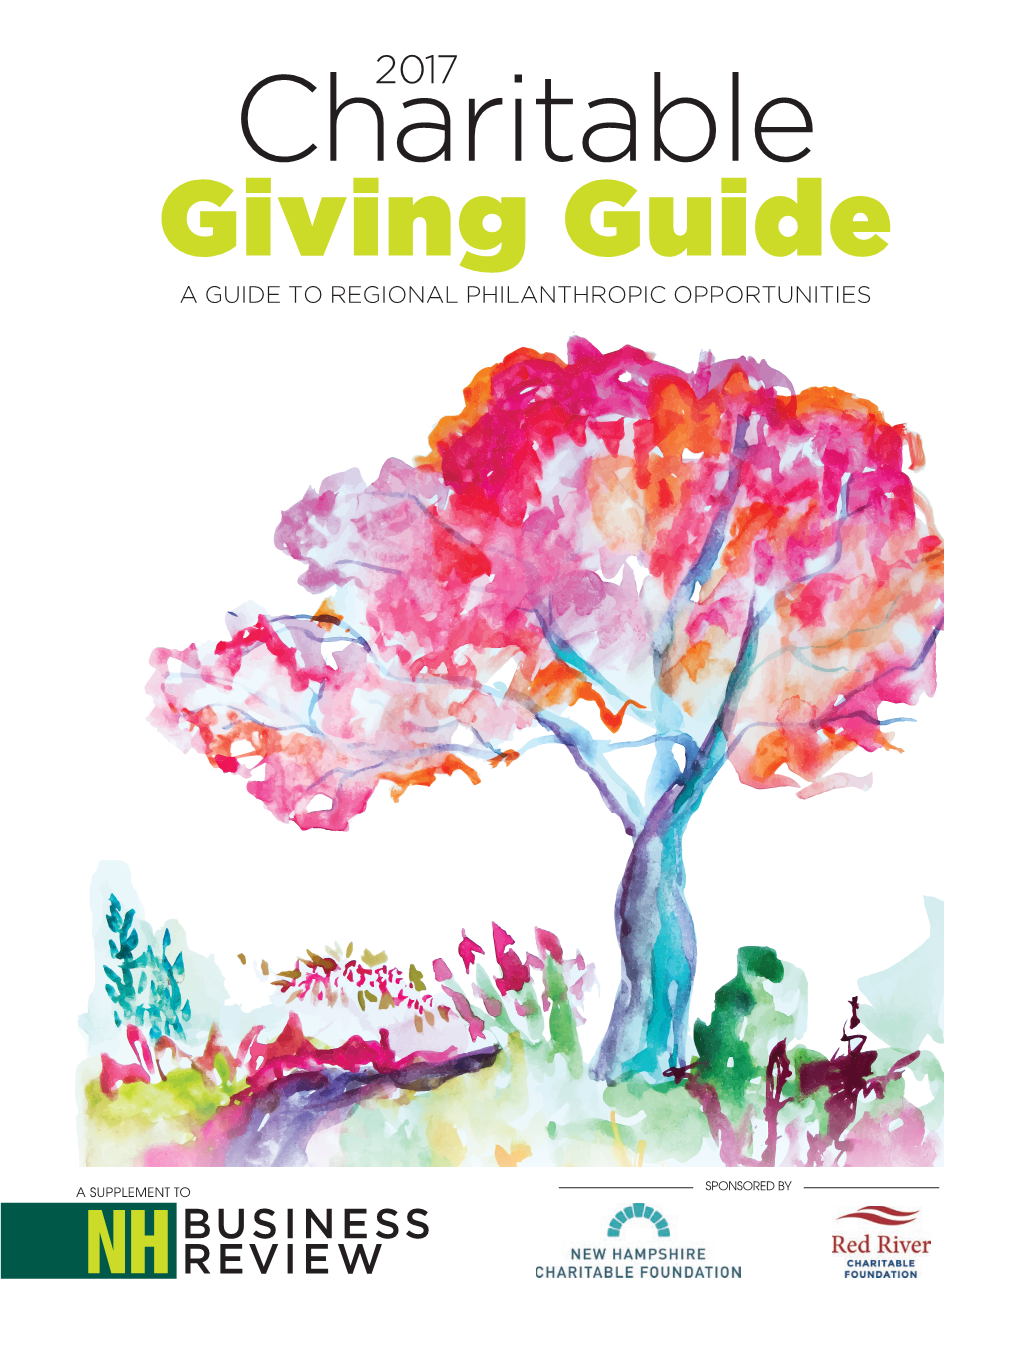 The Charitable Giving Guide